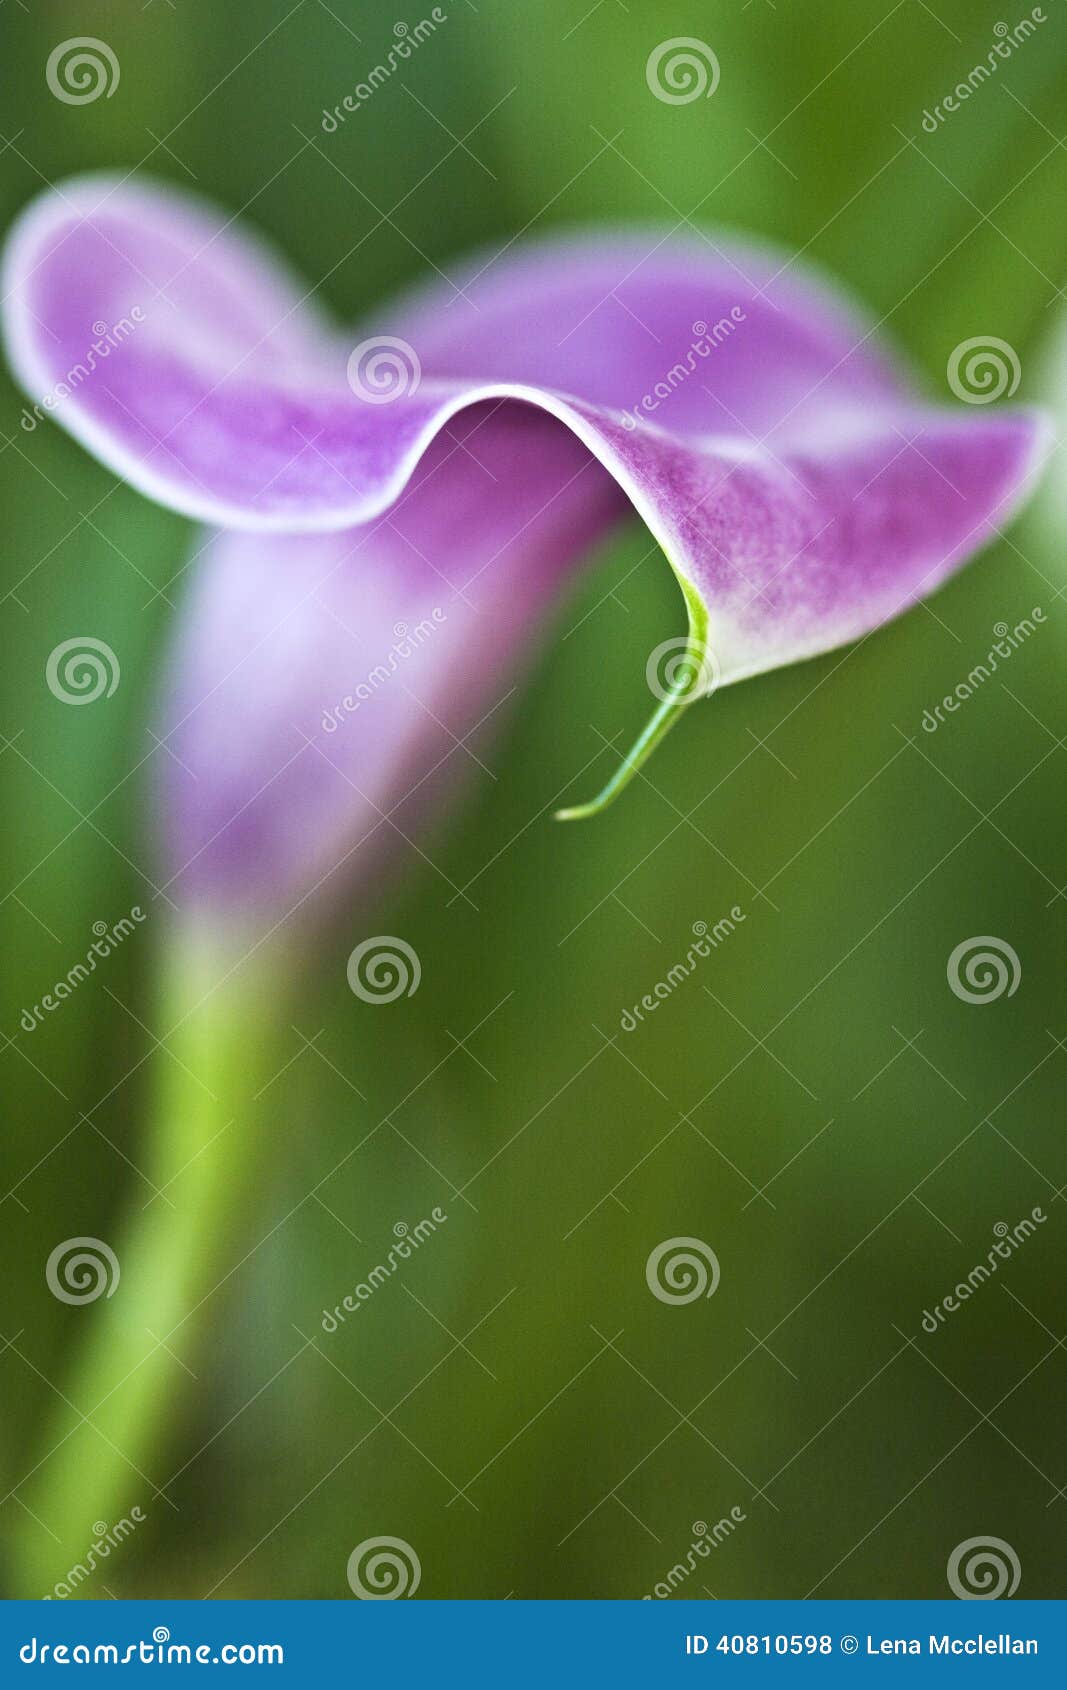 Lavender Lily stock photo. Image of beautiful, gorgeous - 40810598